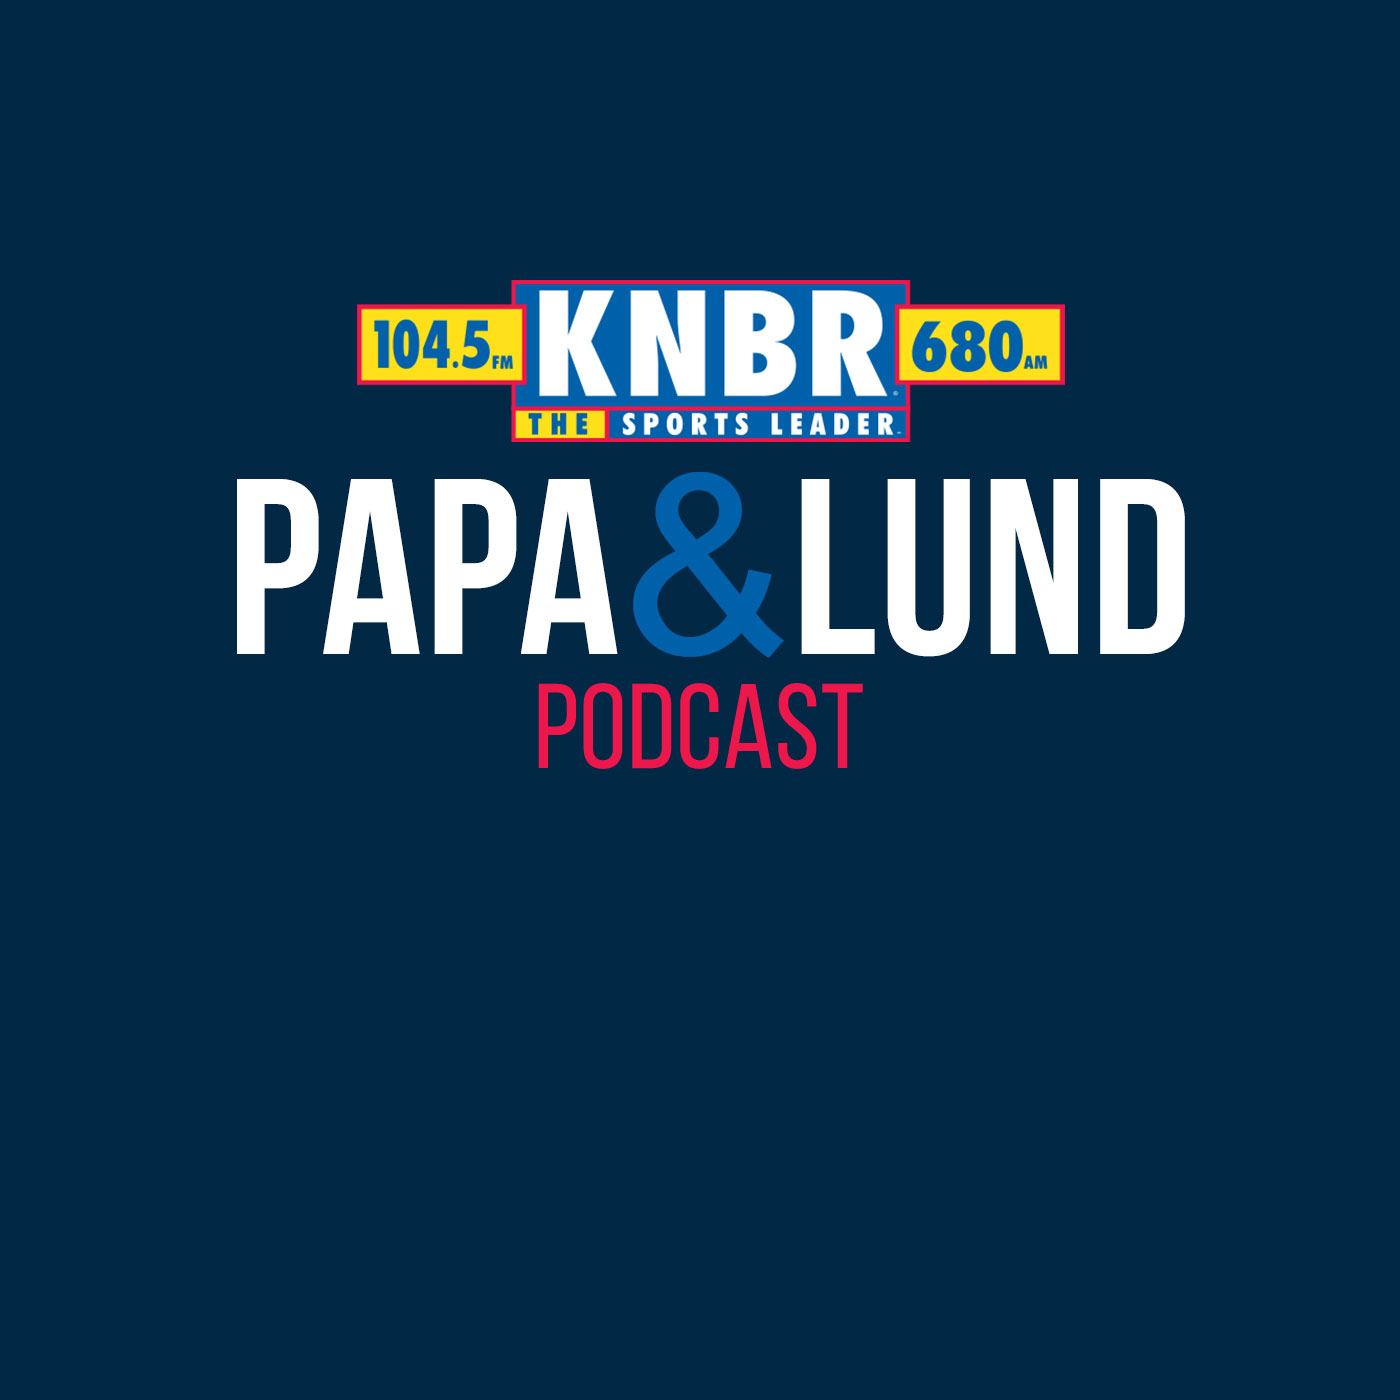 10-21 Nick Clarke joins Papa & Lund to discuss his recent visit to the 49ers Faithful in the UK